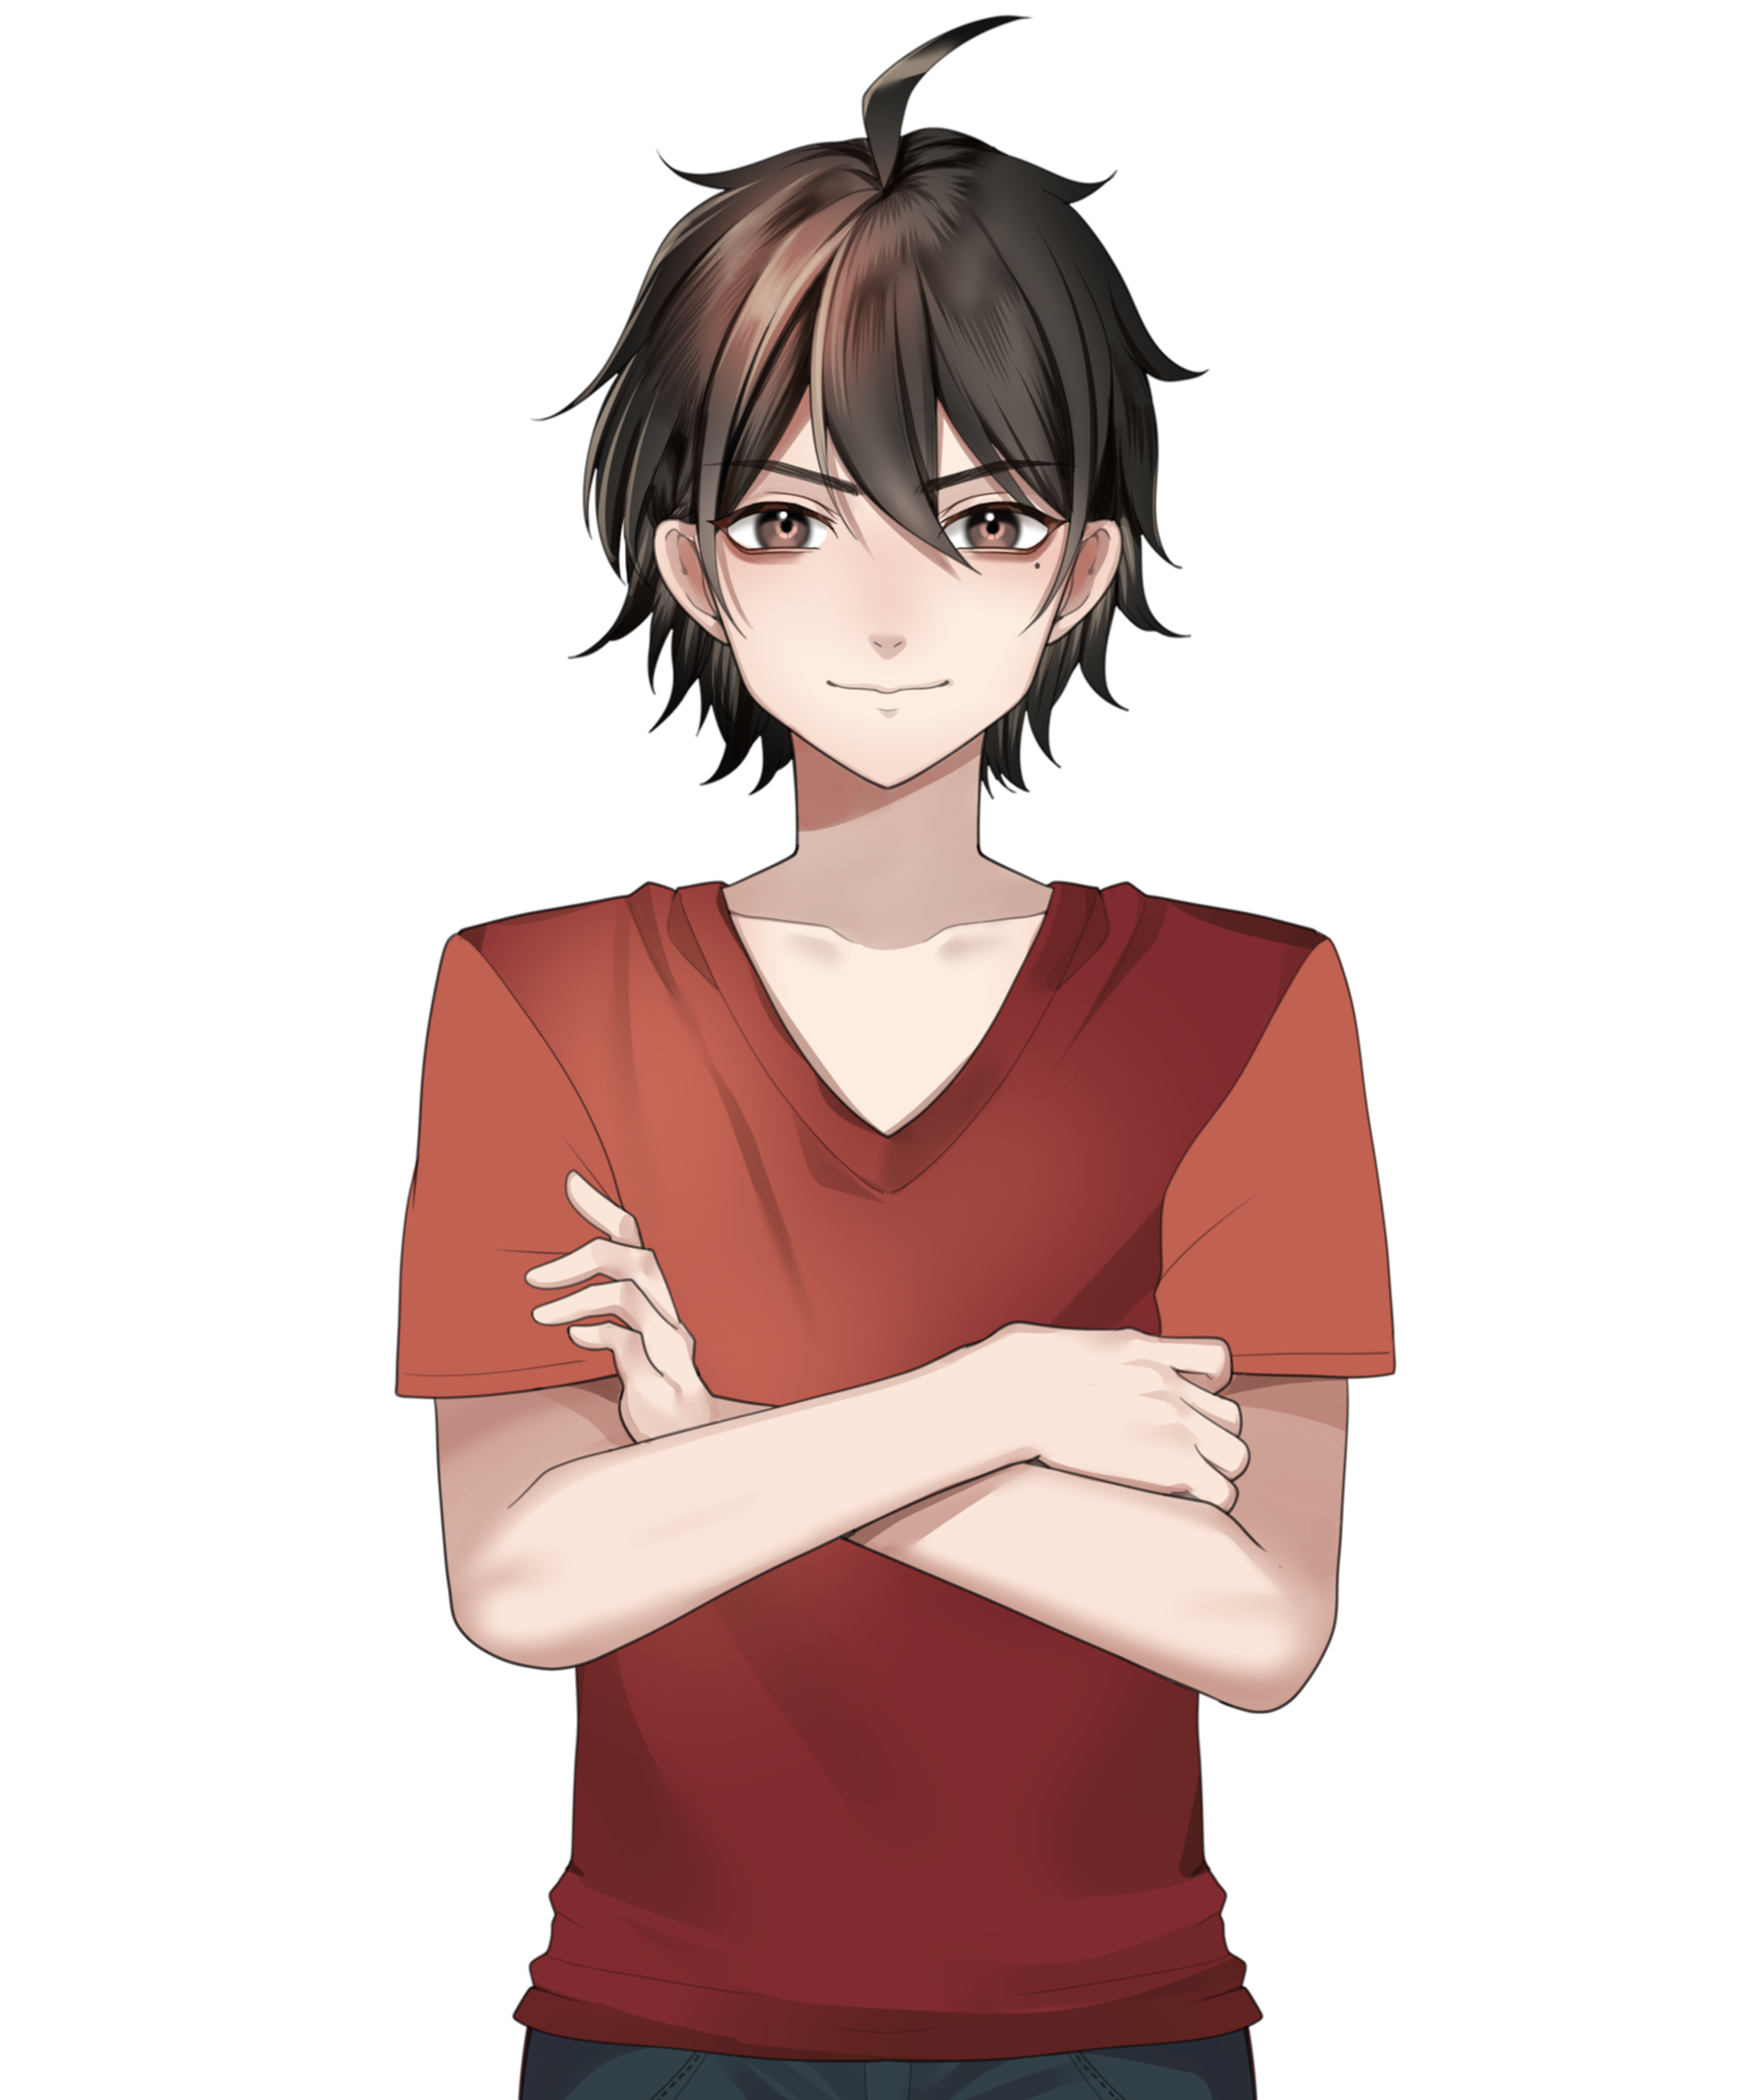 An image of the character Gabriel from the visual novel The Many Deaths of Lily Kosen